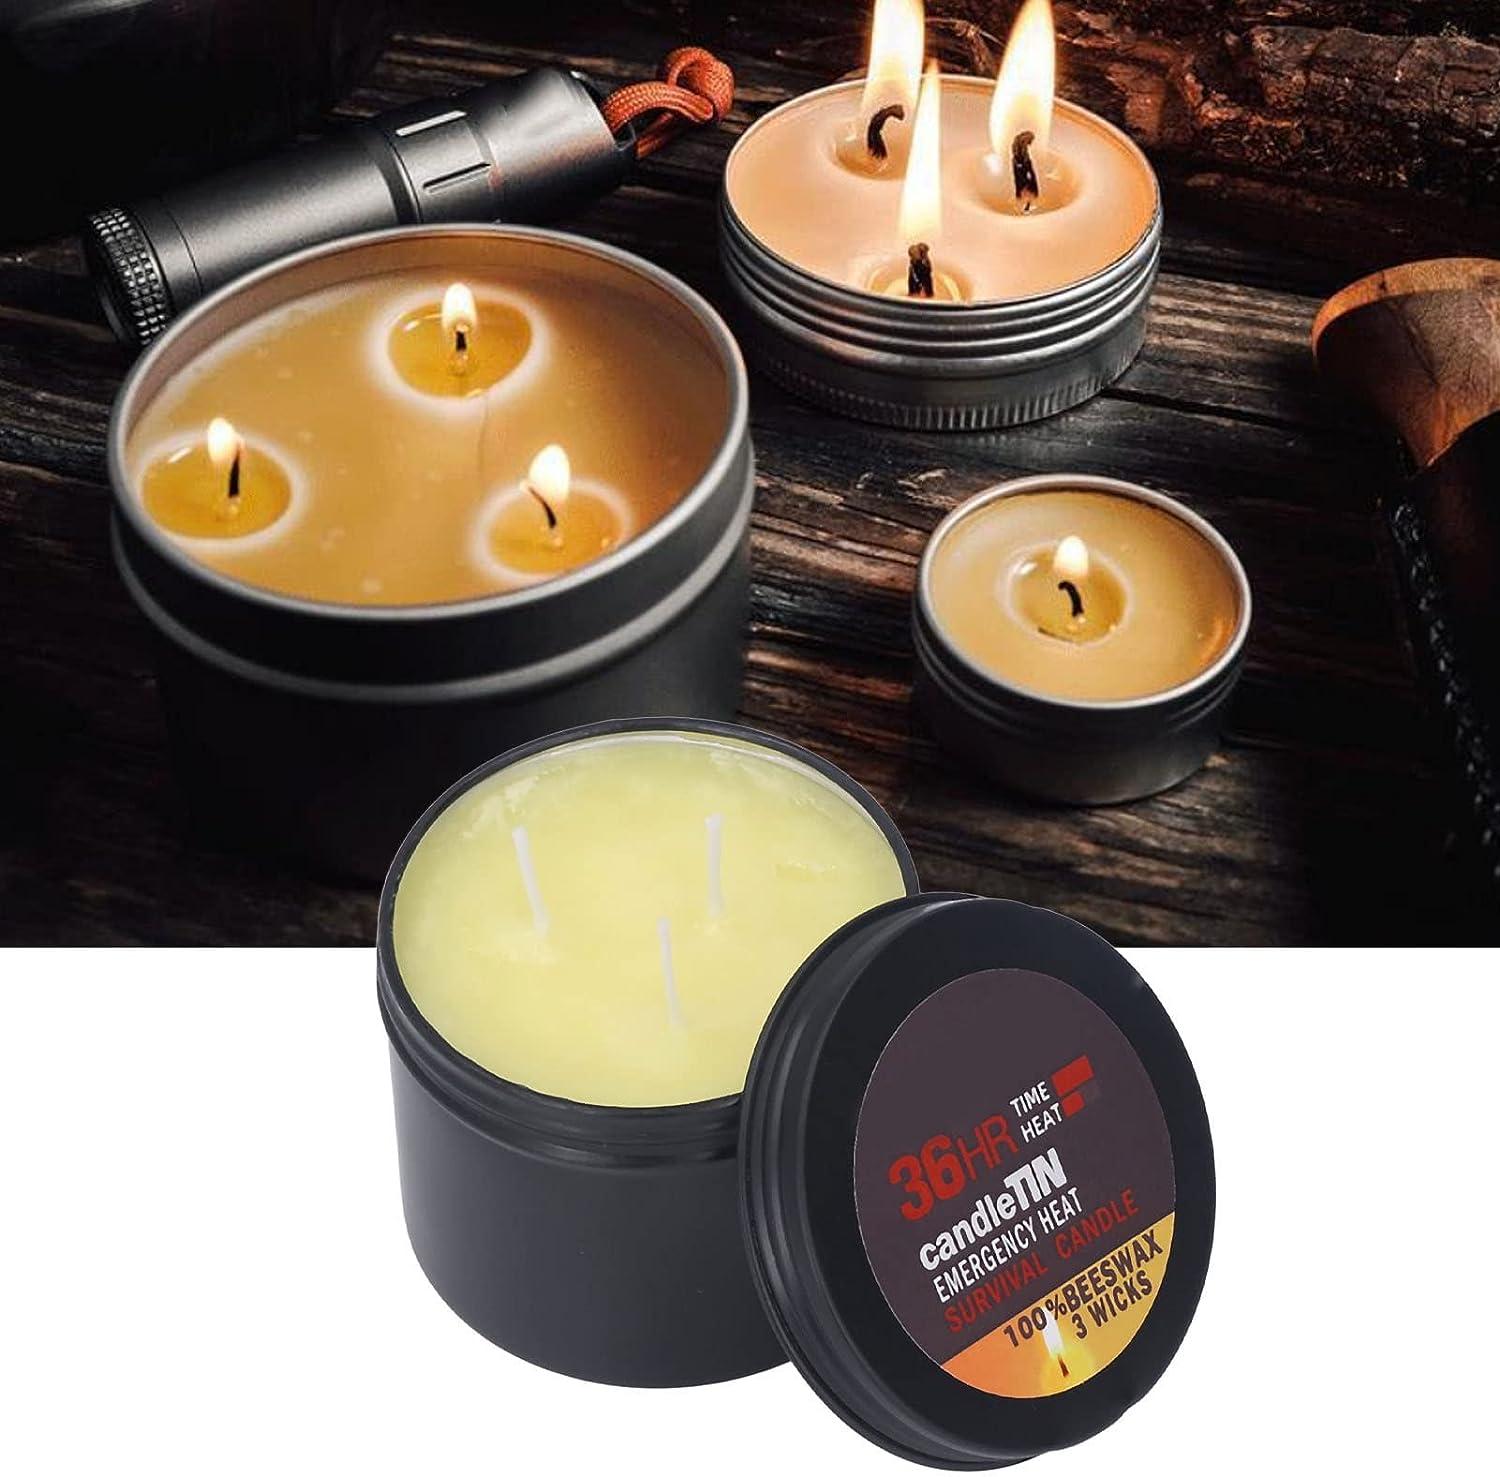 Long Lasting Candles Survival Candle 36 Hours Burning for Home